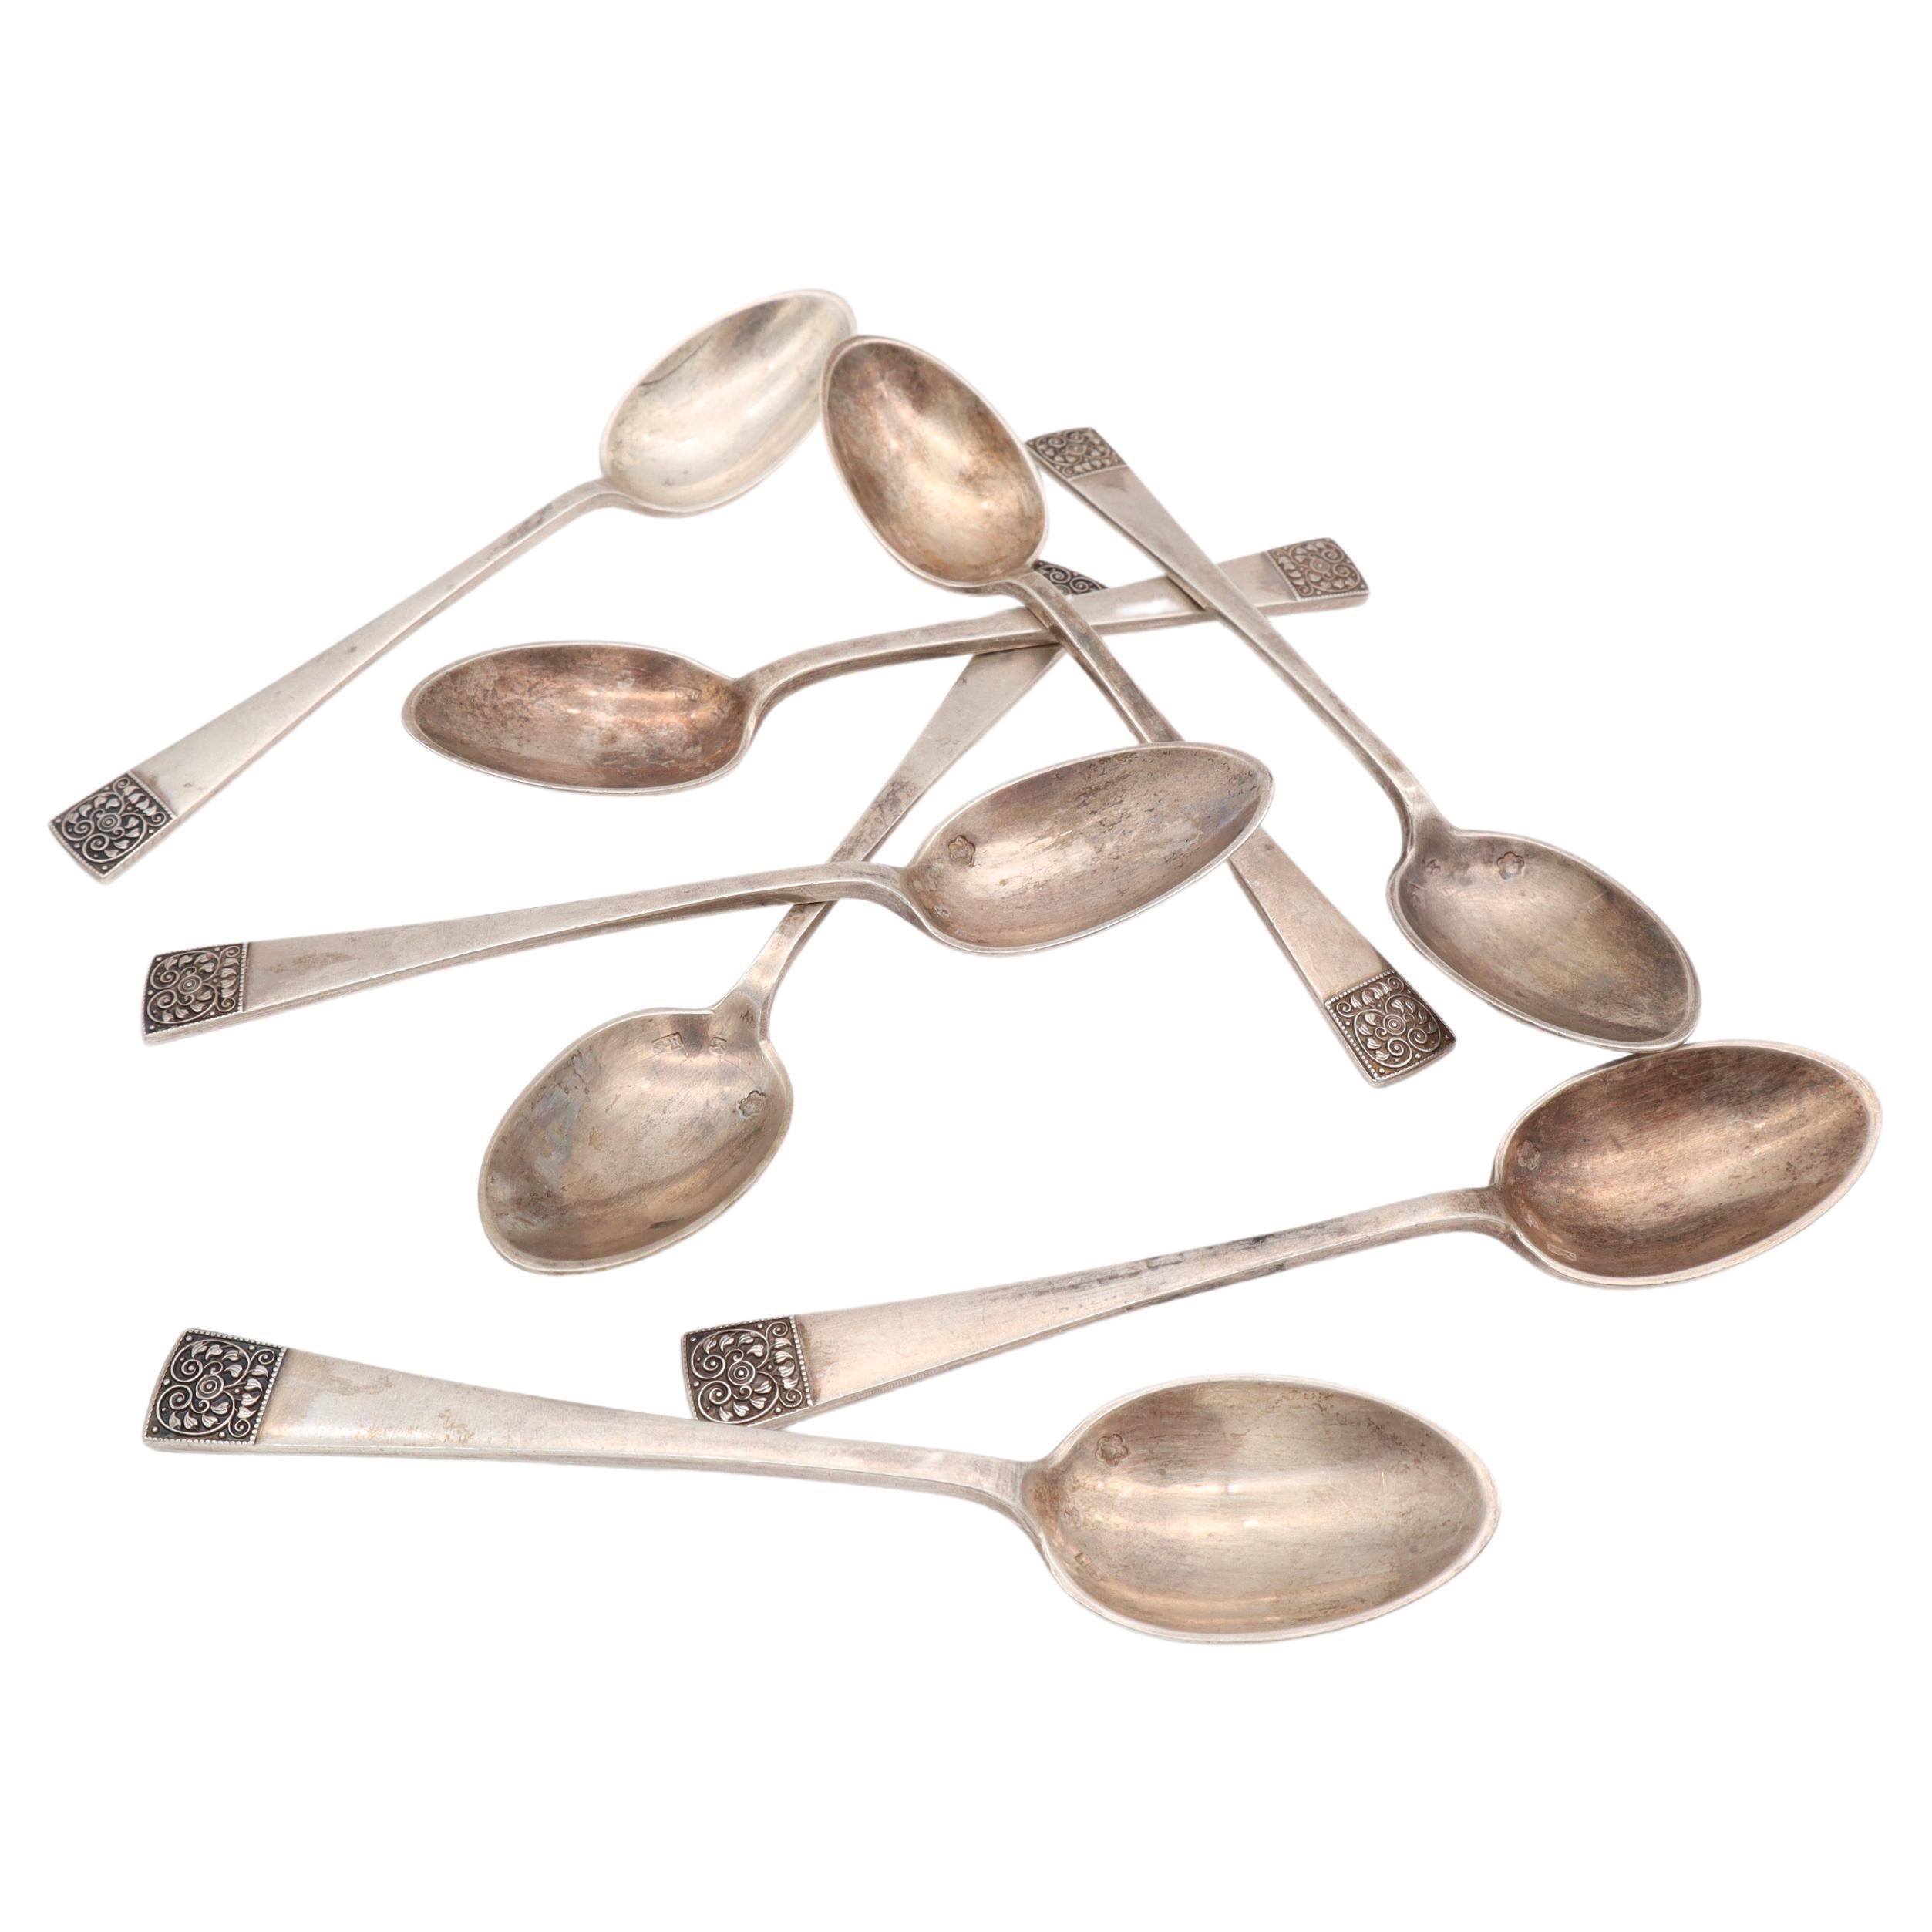 Set of 8 Sterling Silver Spoons, Attributed to Josef Hoffmann, Vienna ca. 1910